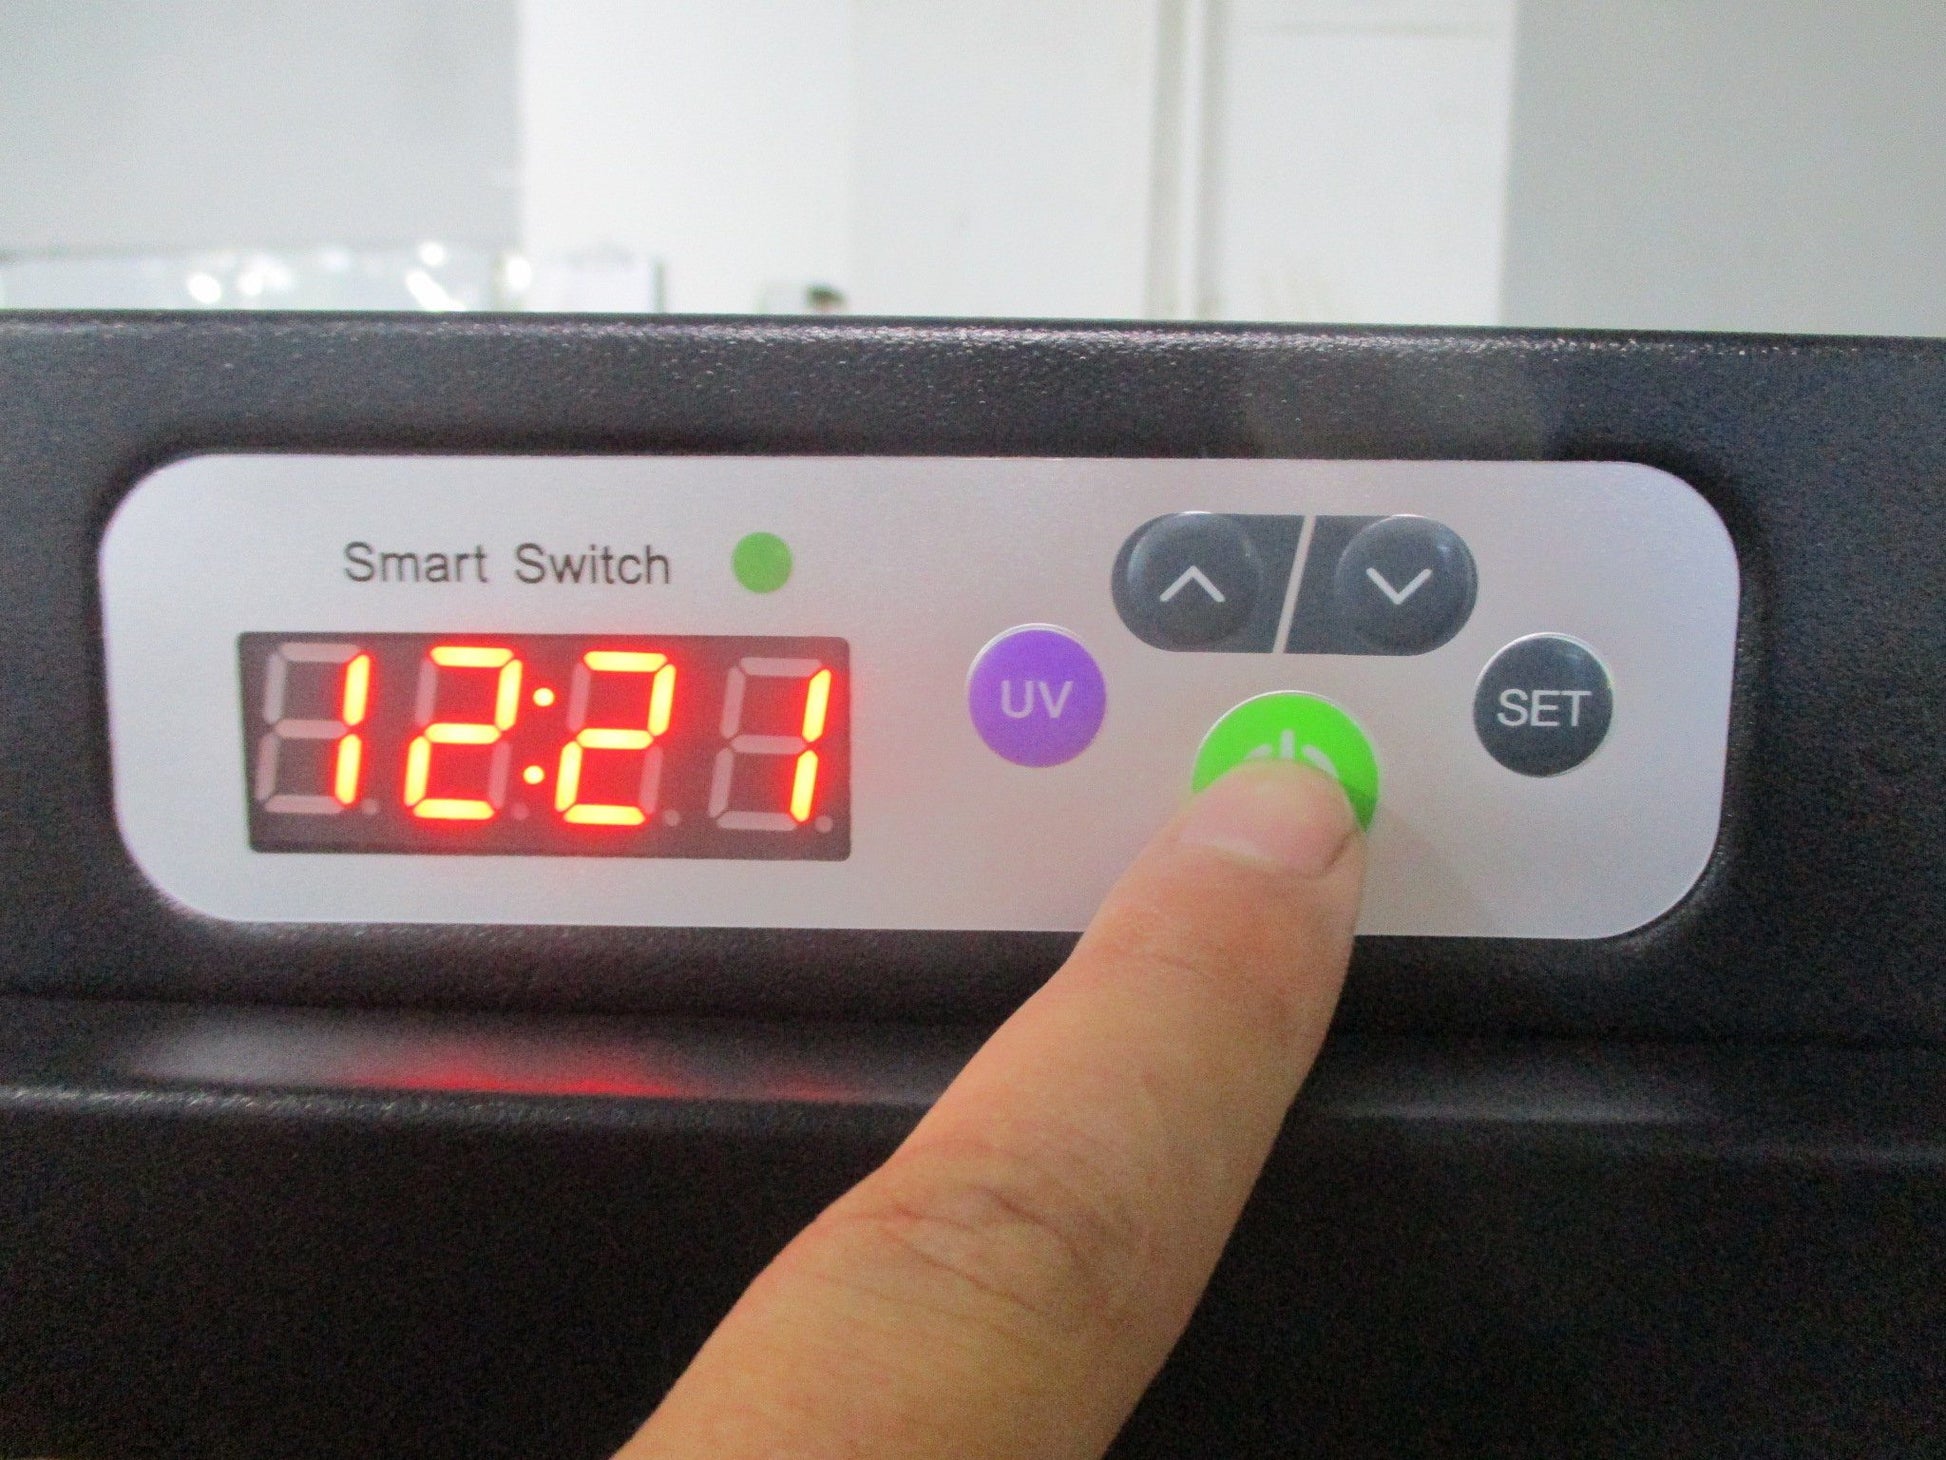 Smart Switch Disinfectant- Has a digital timer you can manually set up with 5 minutes UV Disinfection System inside the cabinet